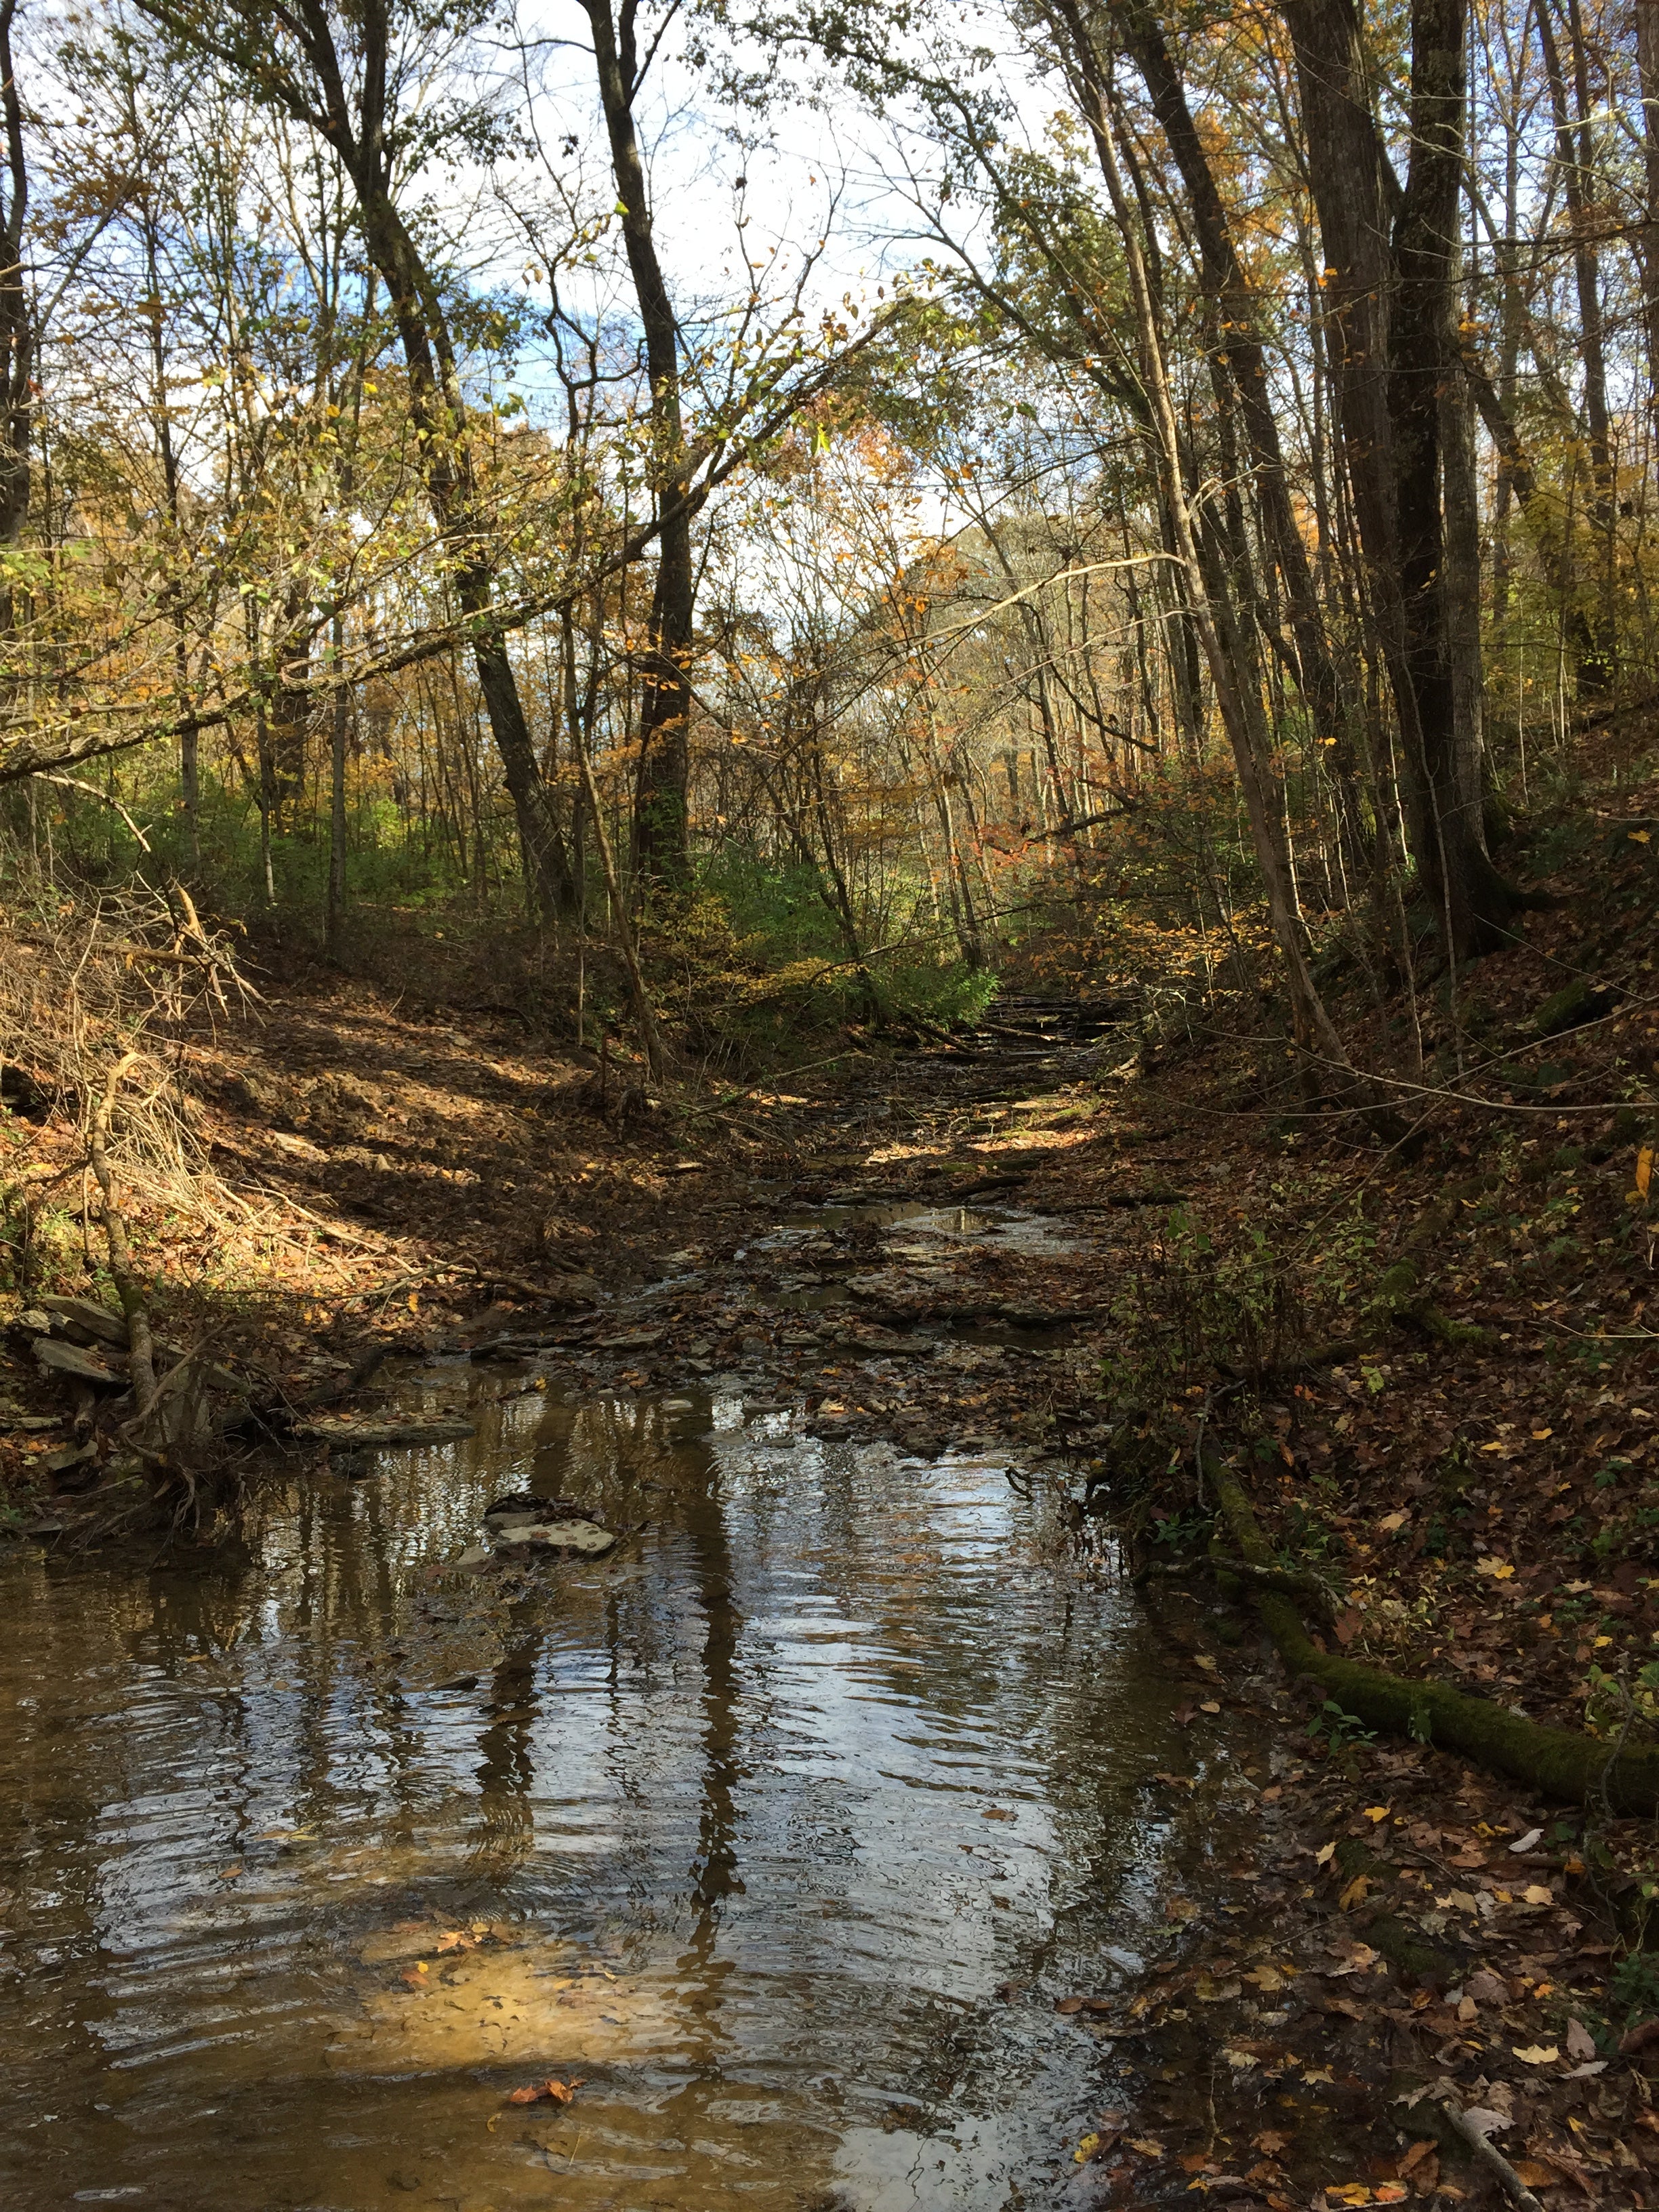 One of the creeks along the horse trails.